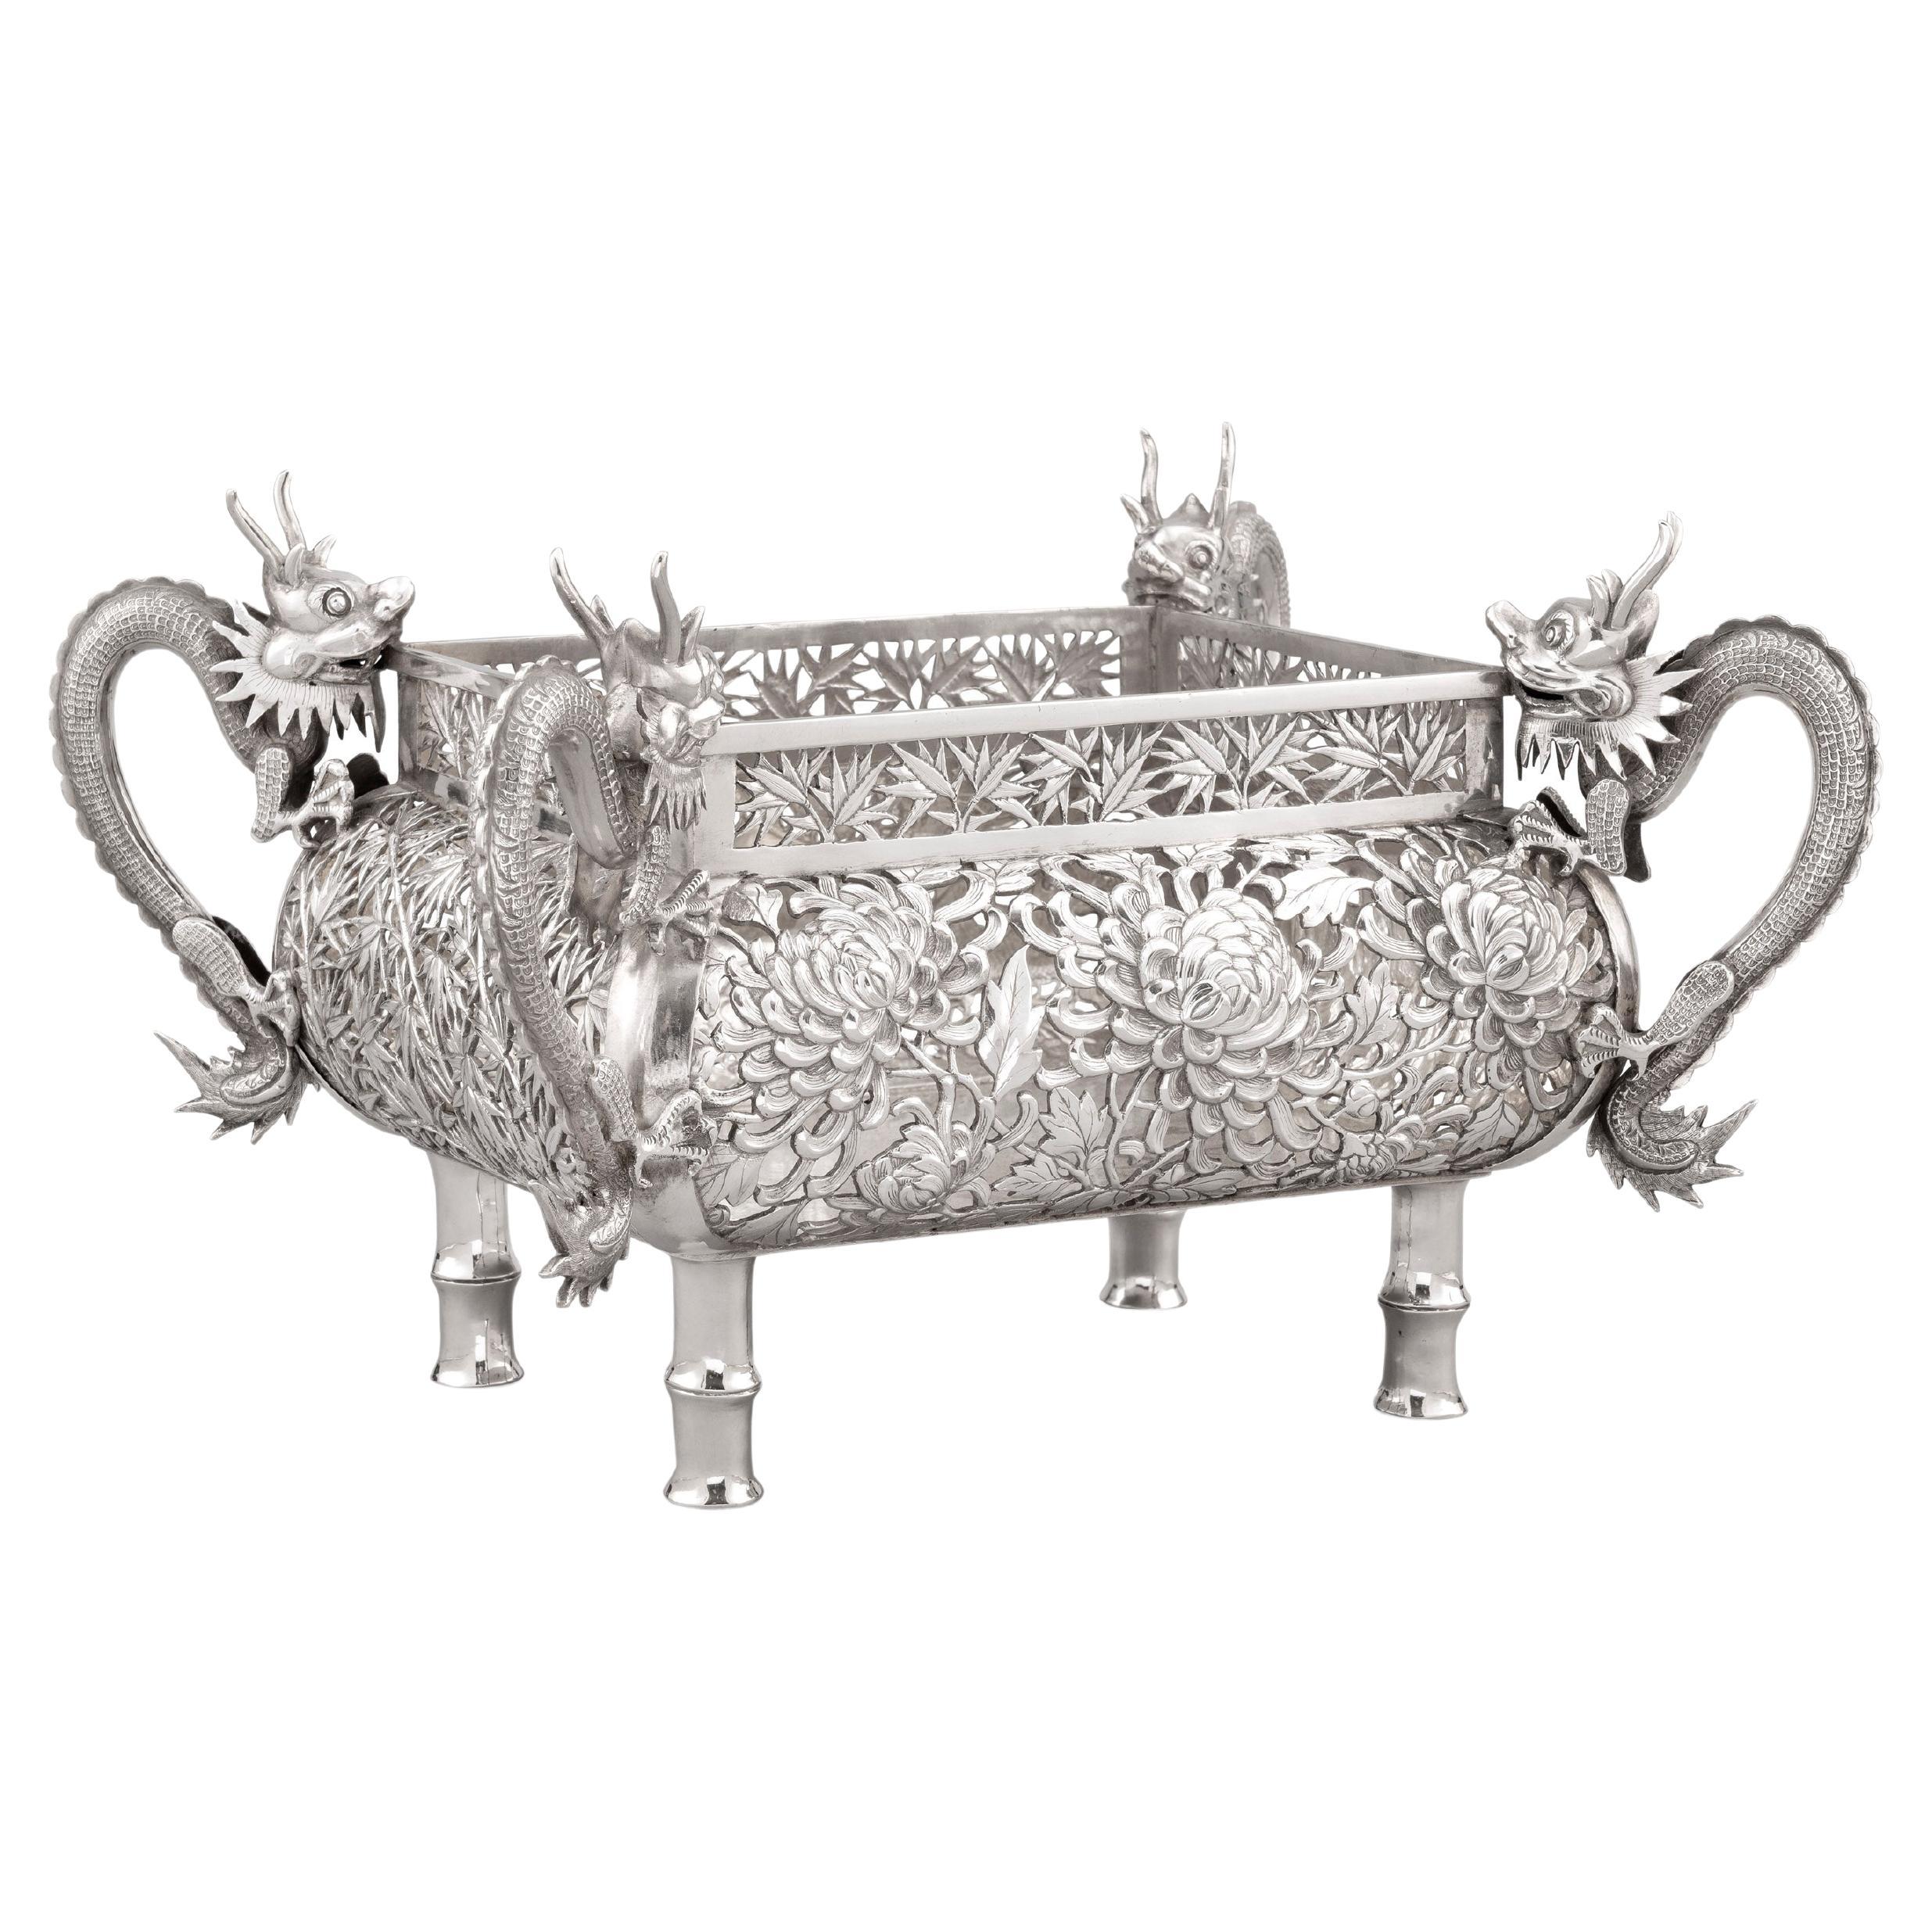 Chinese Export Silver Jardiniere with Dragons and Figures